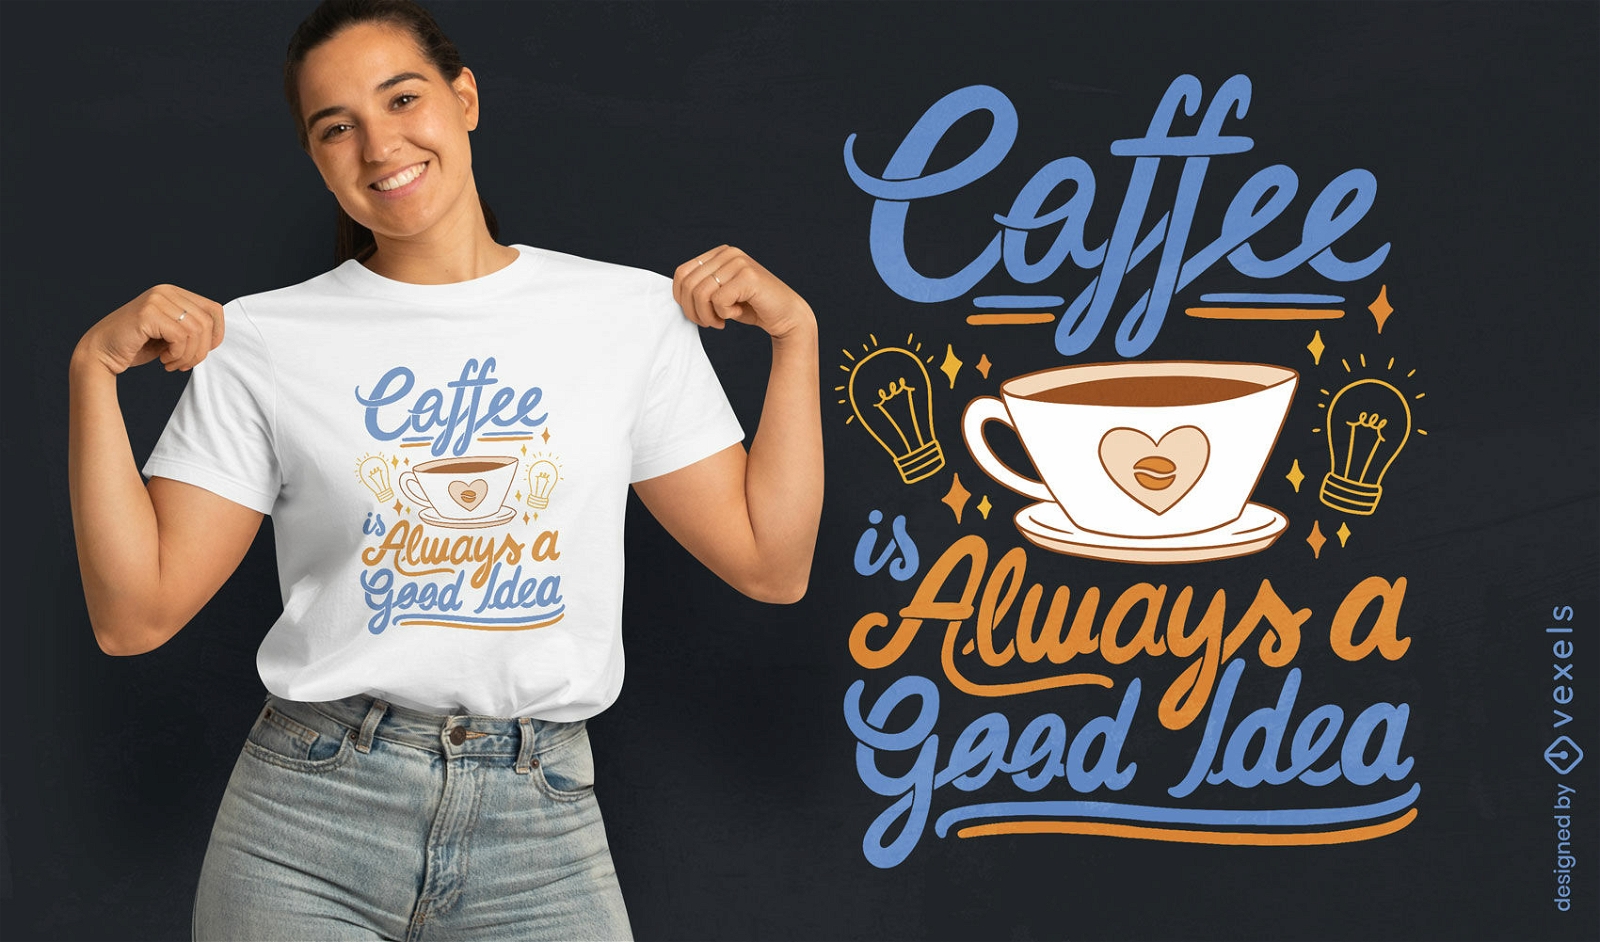 Coffee enthusiast quote t-shirt design